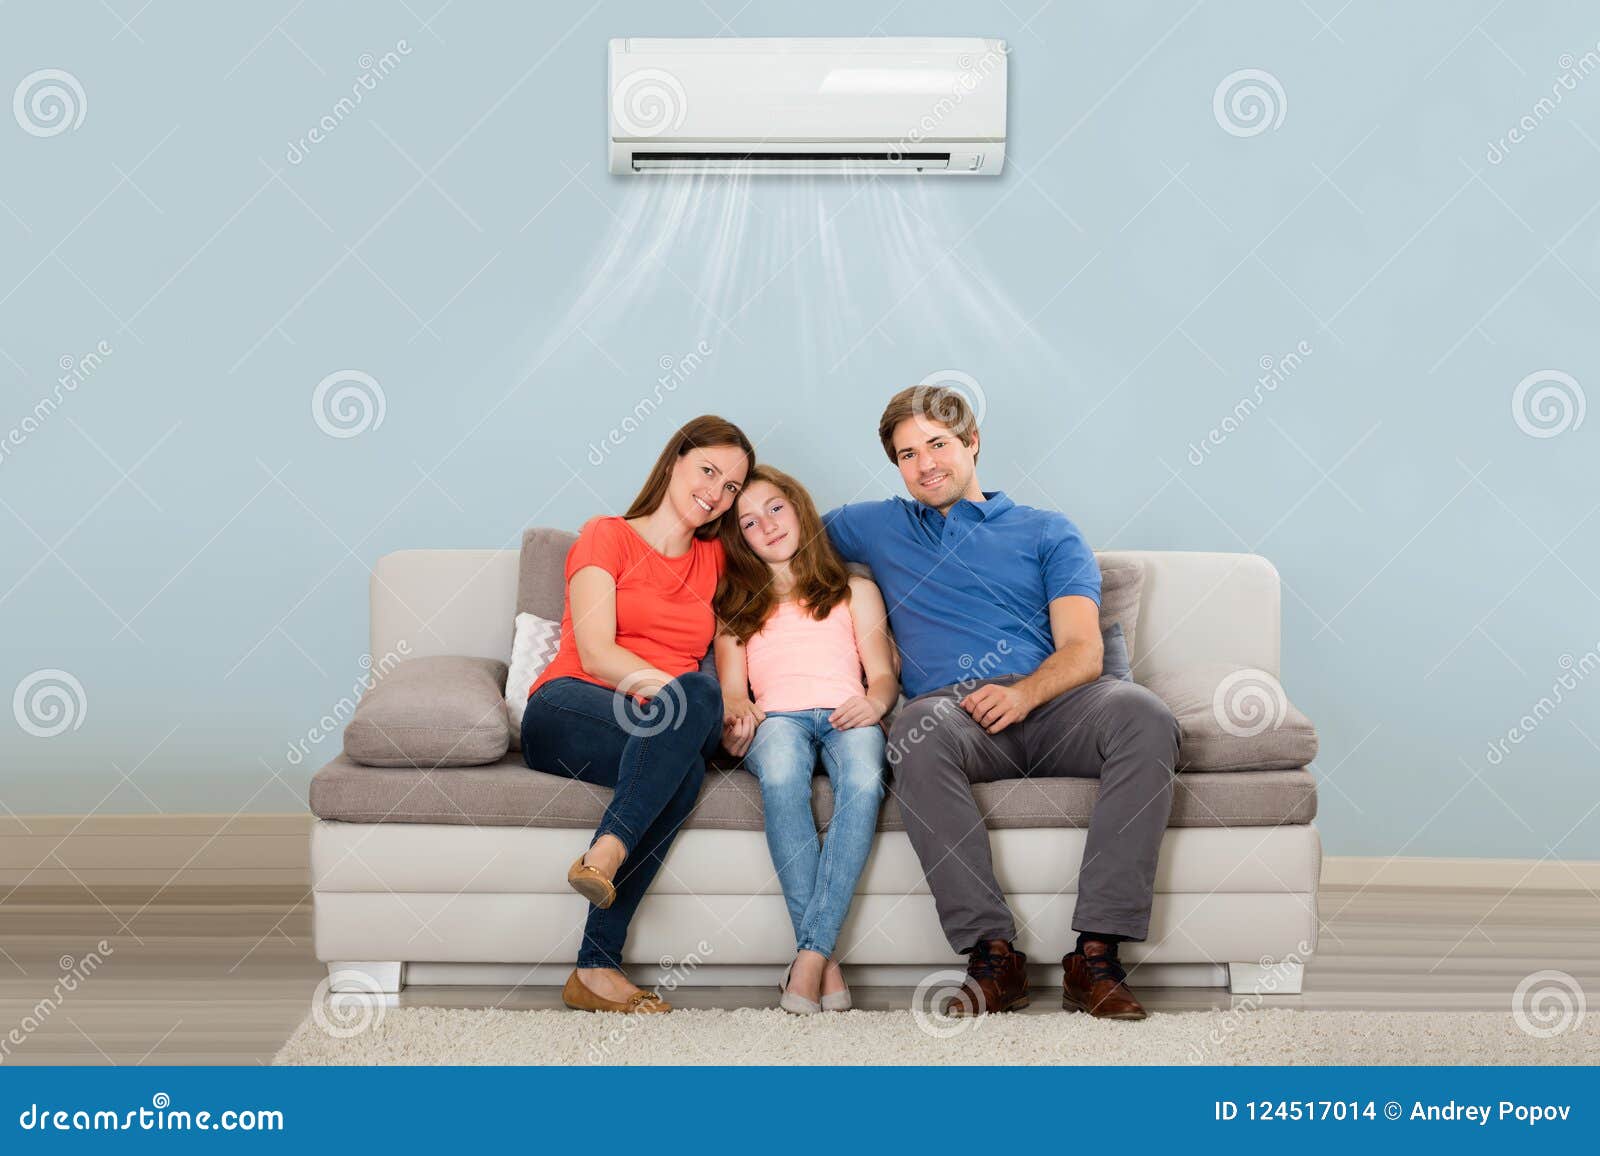 family sitting on sofa under air conditioning